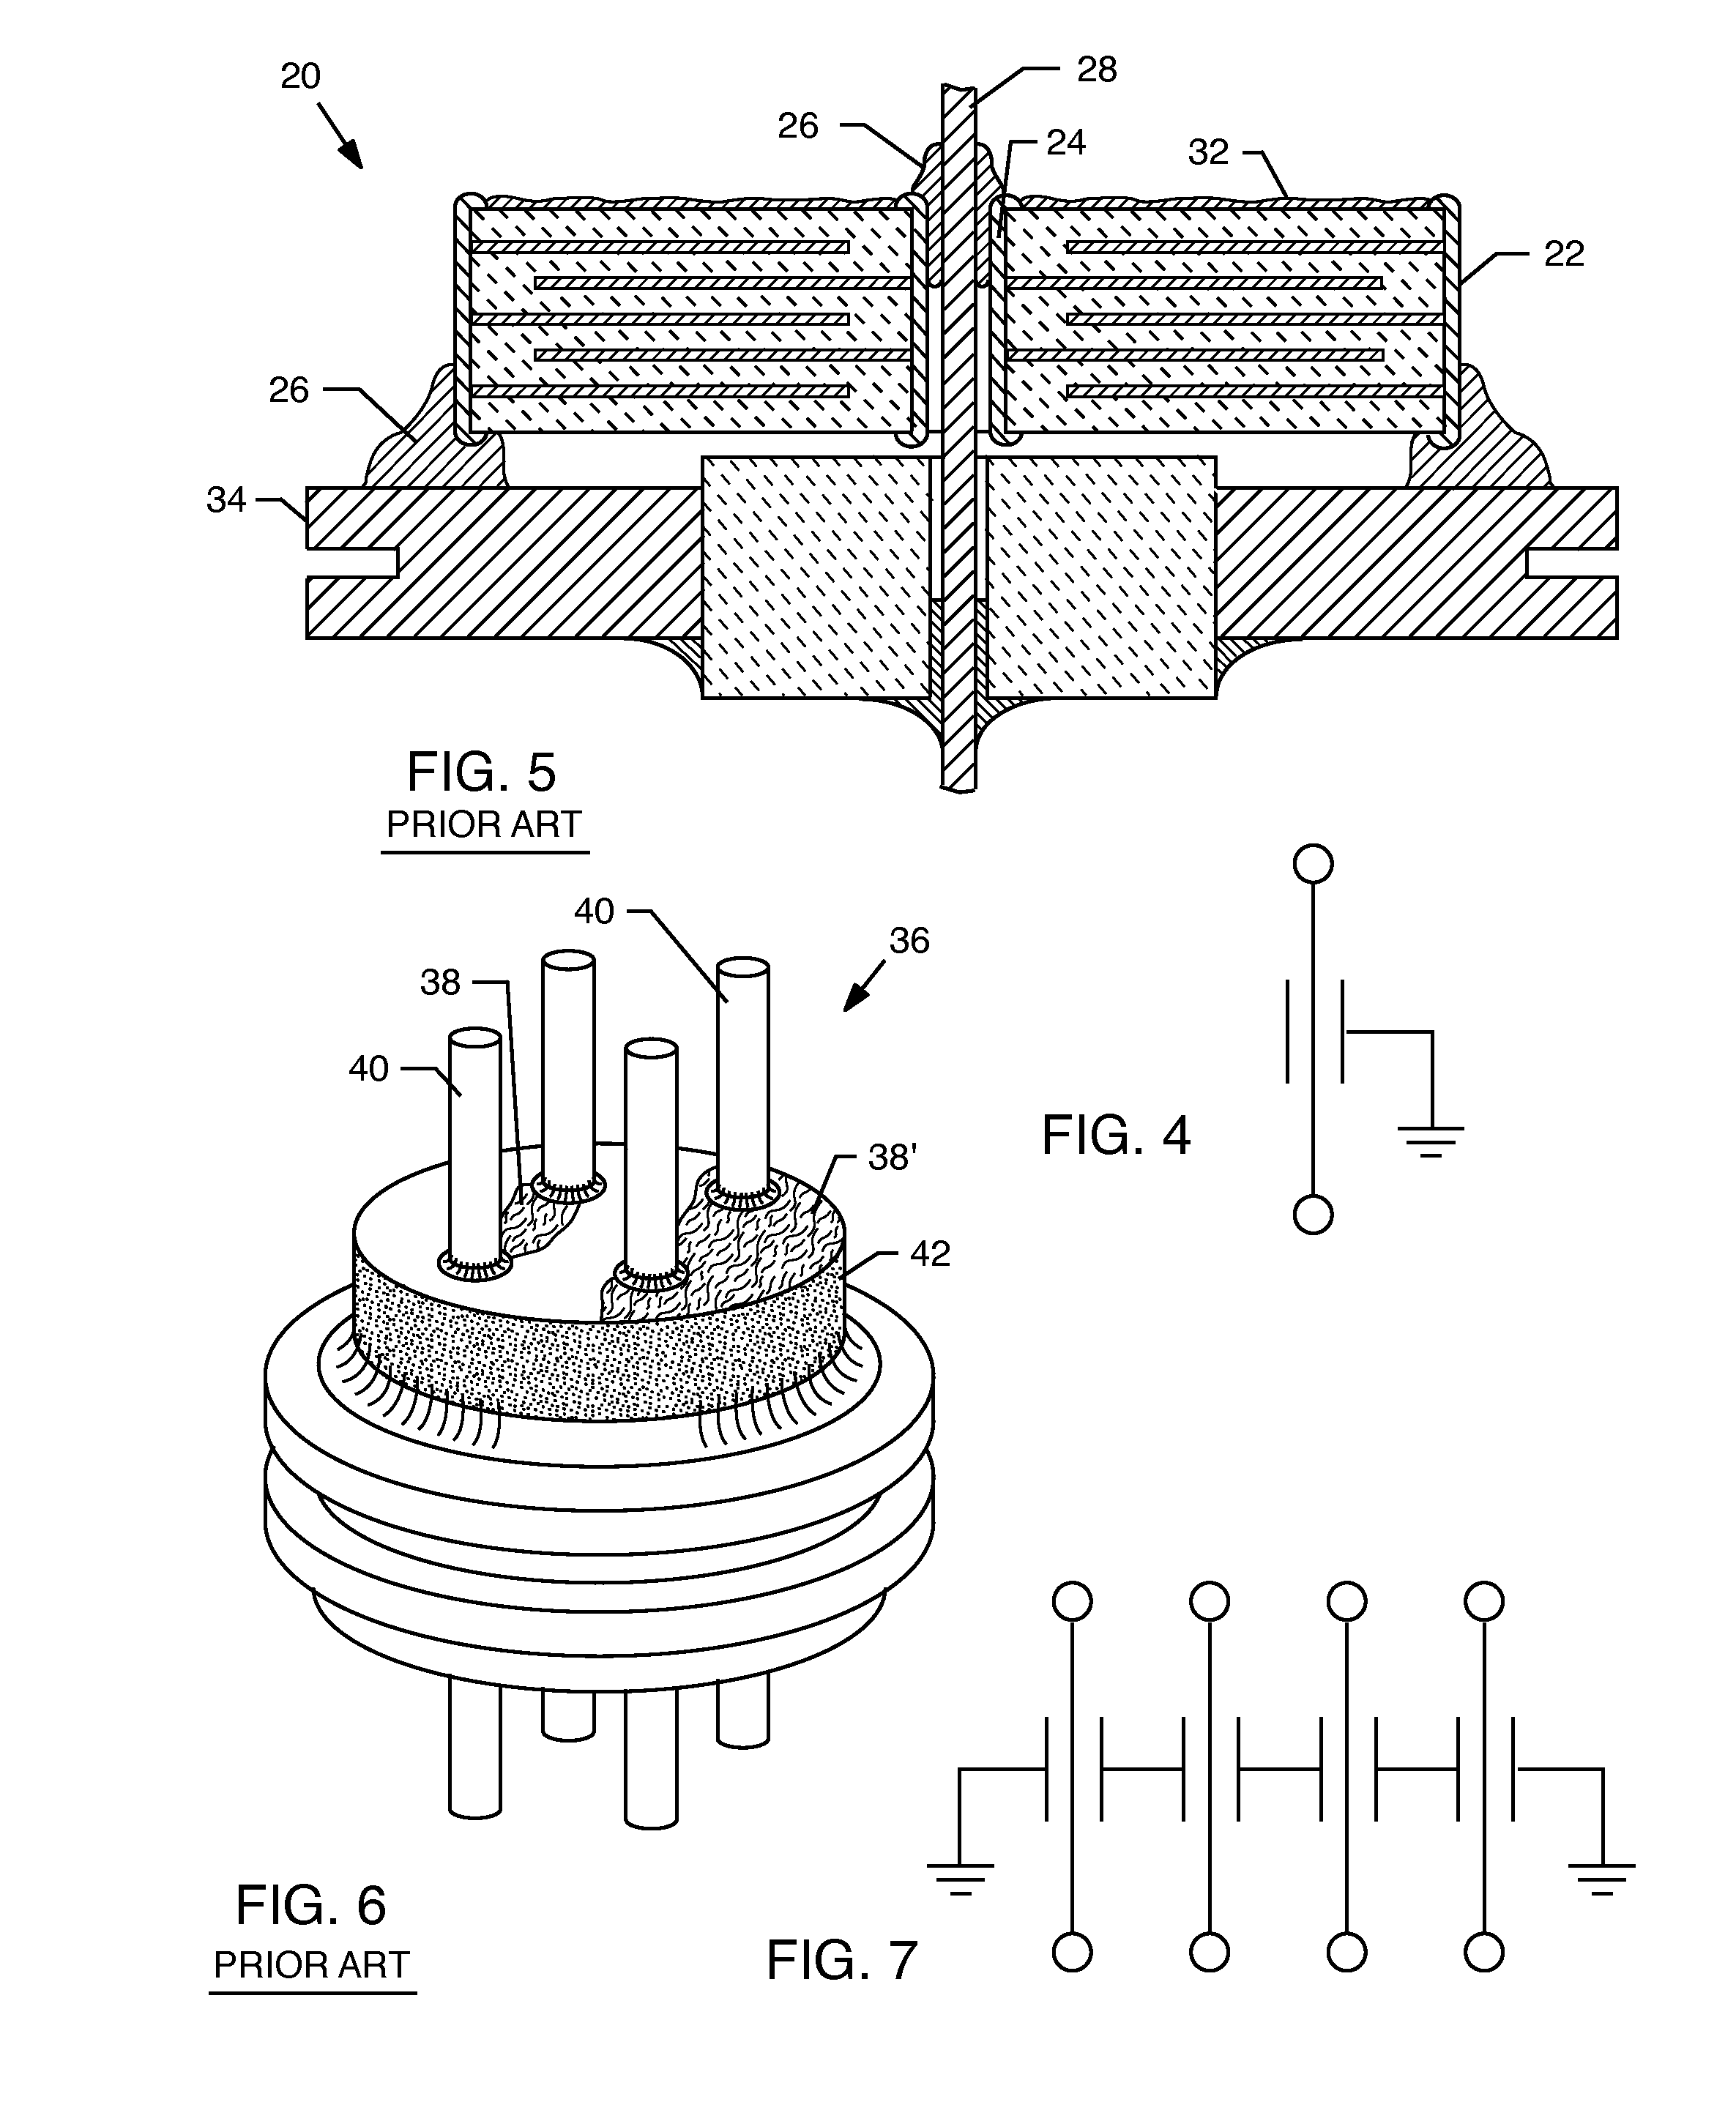 Electronic network components utilizing biocompatible conductive adhesives for direct body fluid exposure